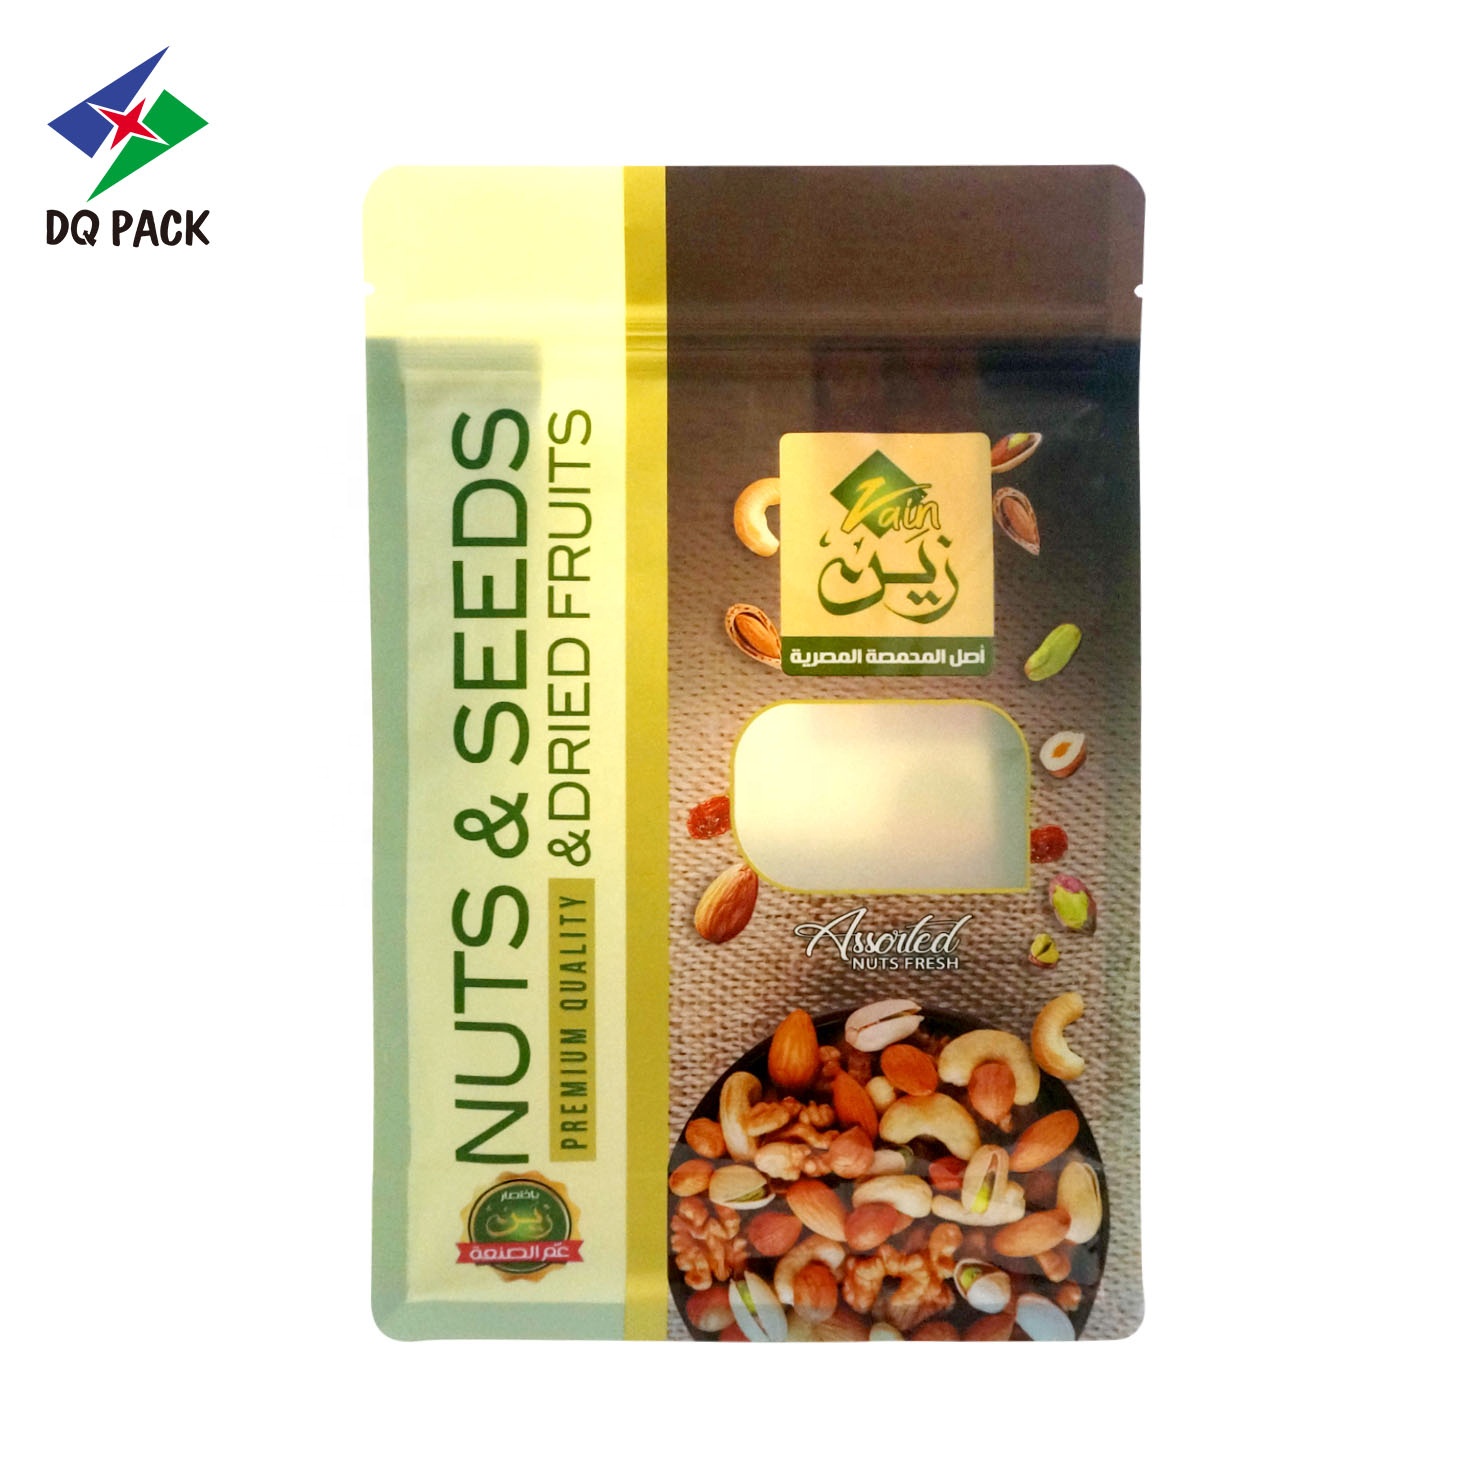 DQ PACK Custom Printed Stand up Pouch Packaging Bag with Zipper For Nut Snack